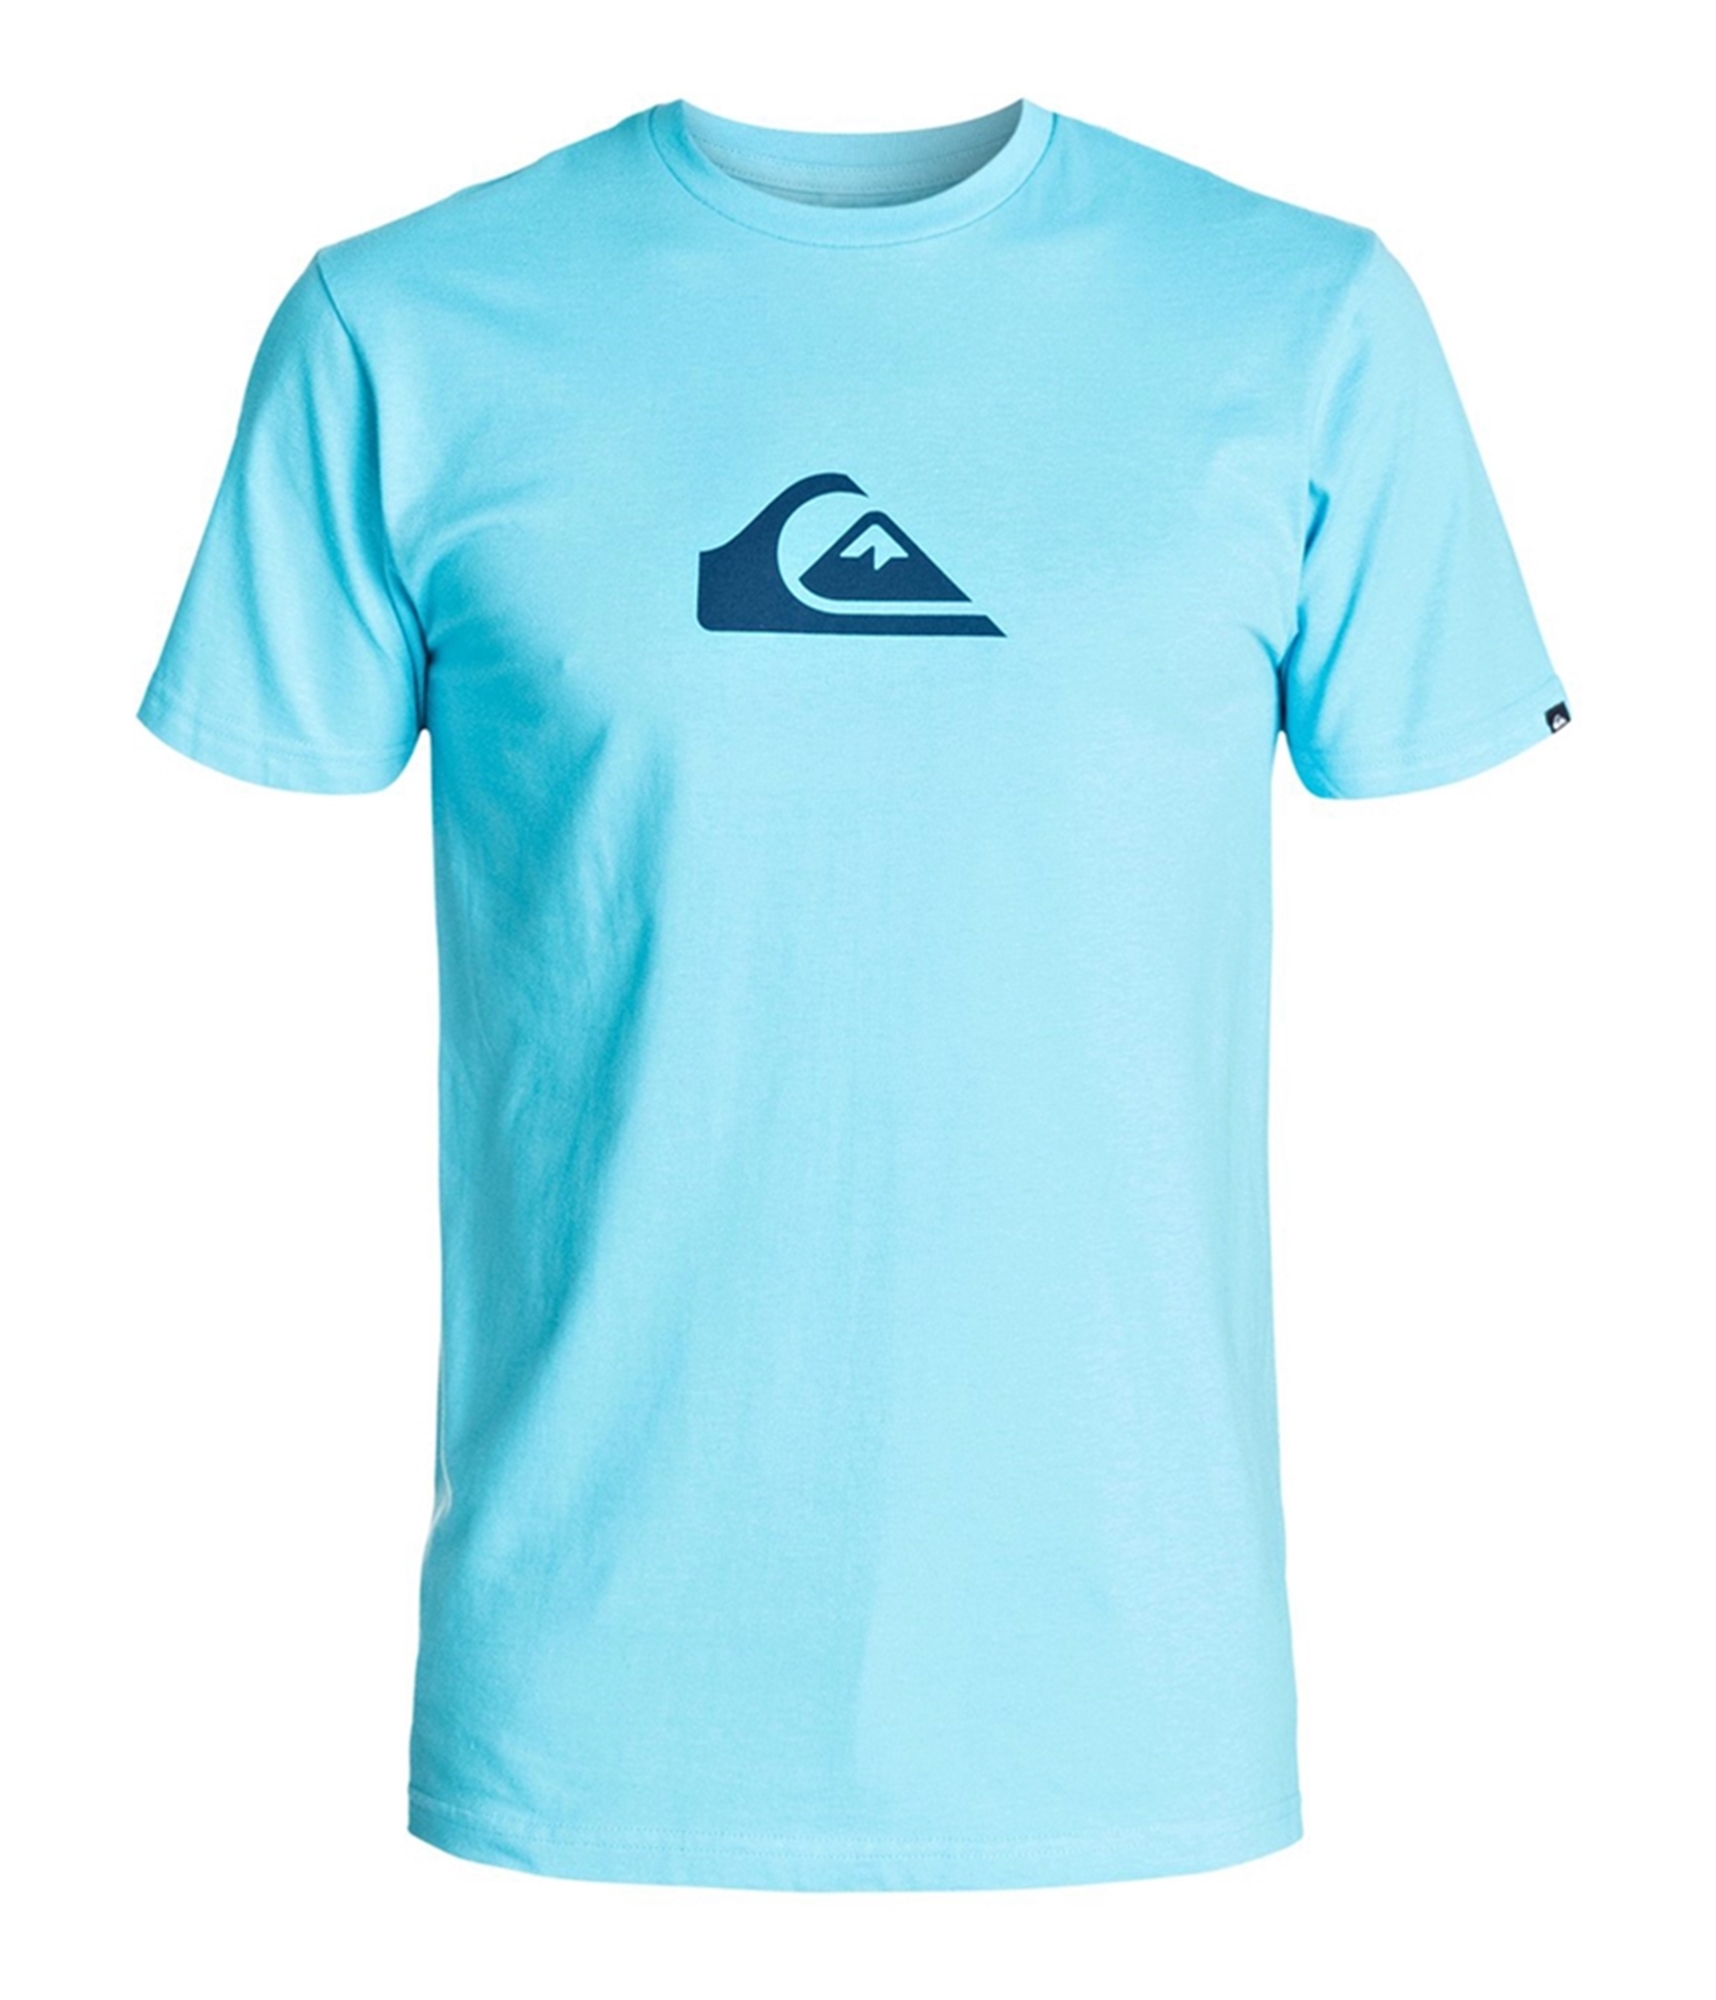 Buy a Mens Quiksilver Everyday Logo Graphic T-Shirt Online | TagsWeekly.com